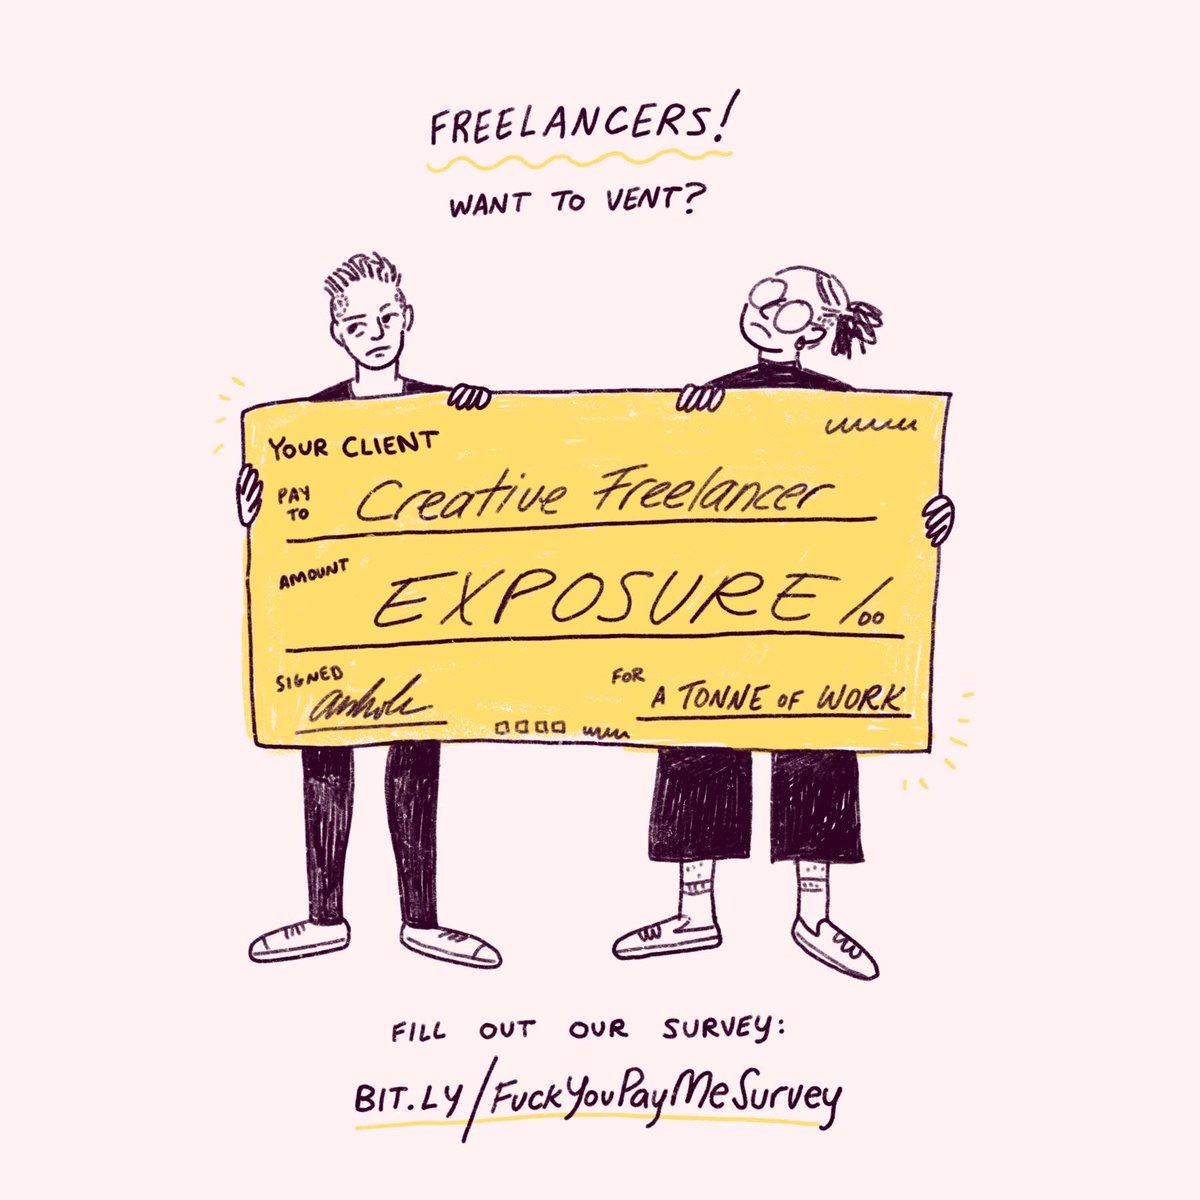 Also! Tell us your worst freelancing horror stories as  @mariadraws and I are putting together a project on freelancer rights and we want to know what creative freelancers struggle with the most!Find the survey right here: http://bit.ly/FuckYouPayMeSurvey